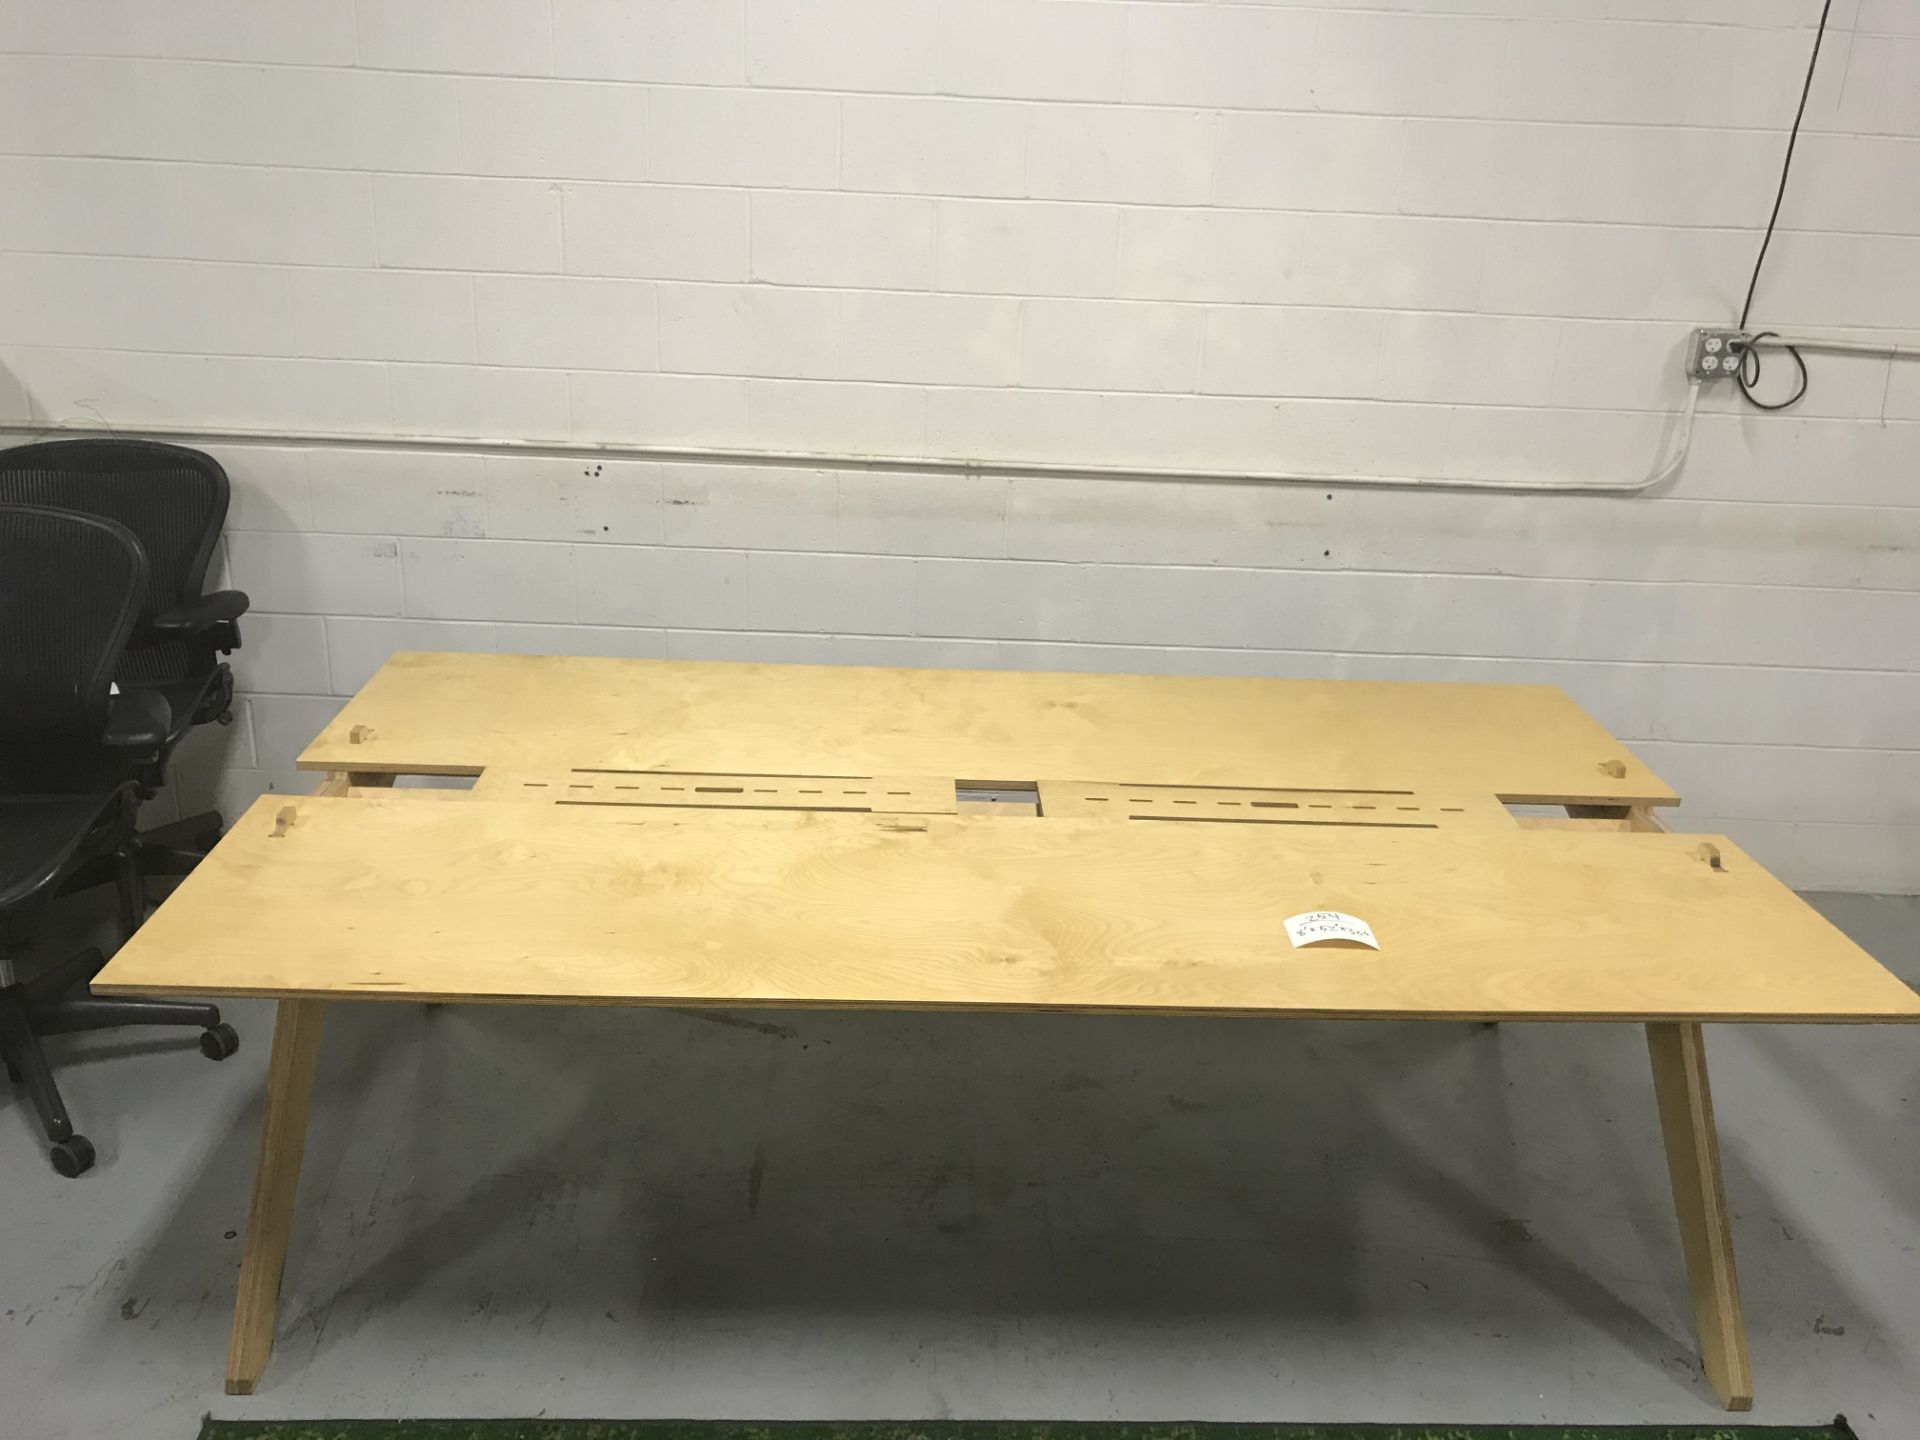 All Wood Conference Table/Platform Table (Bungs) w/ Open Middle Area 8'L x 52"W 30"H - Image 2 of 3